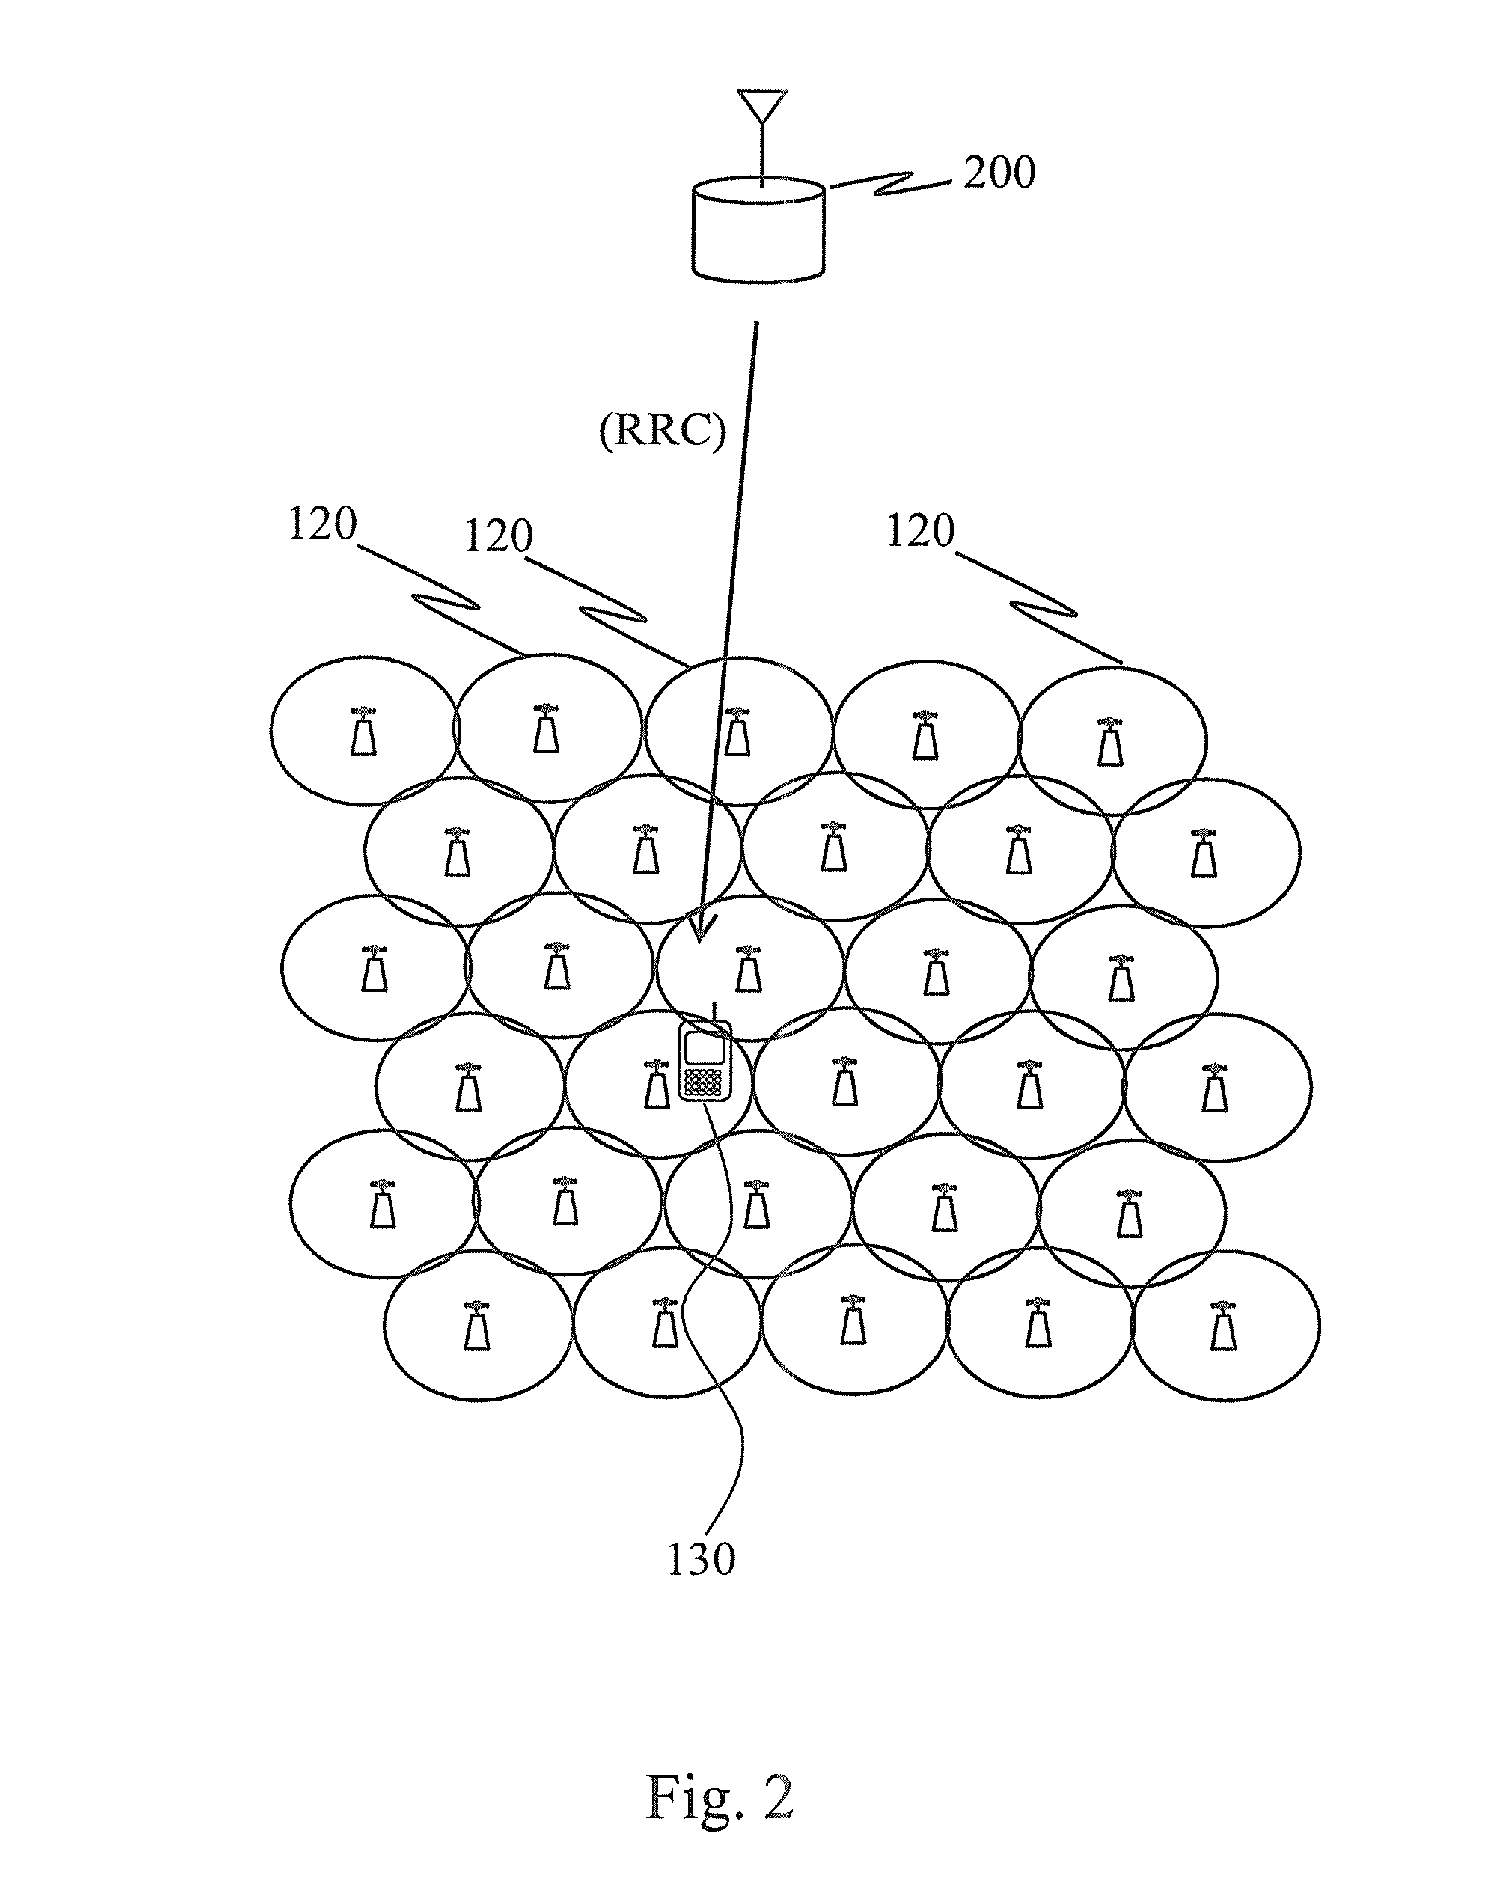 Small cell initial access and physical cell identity determination